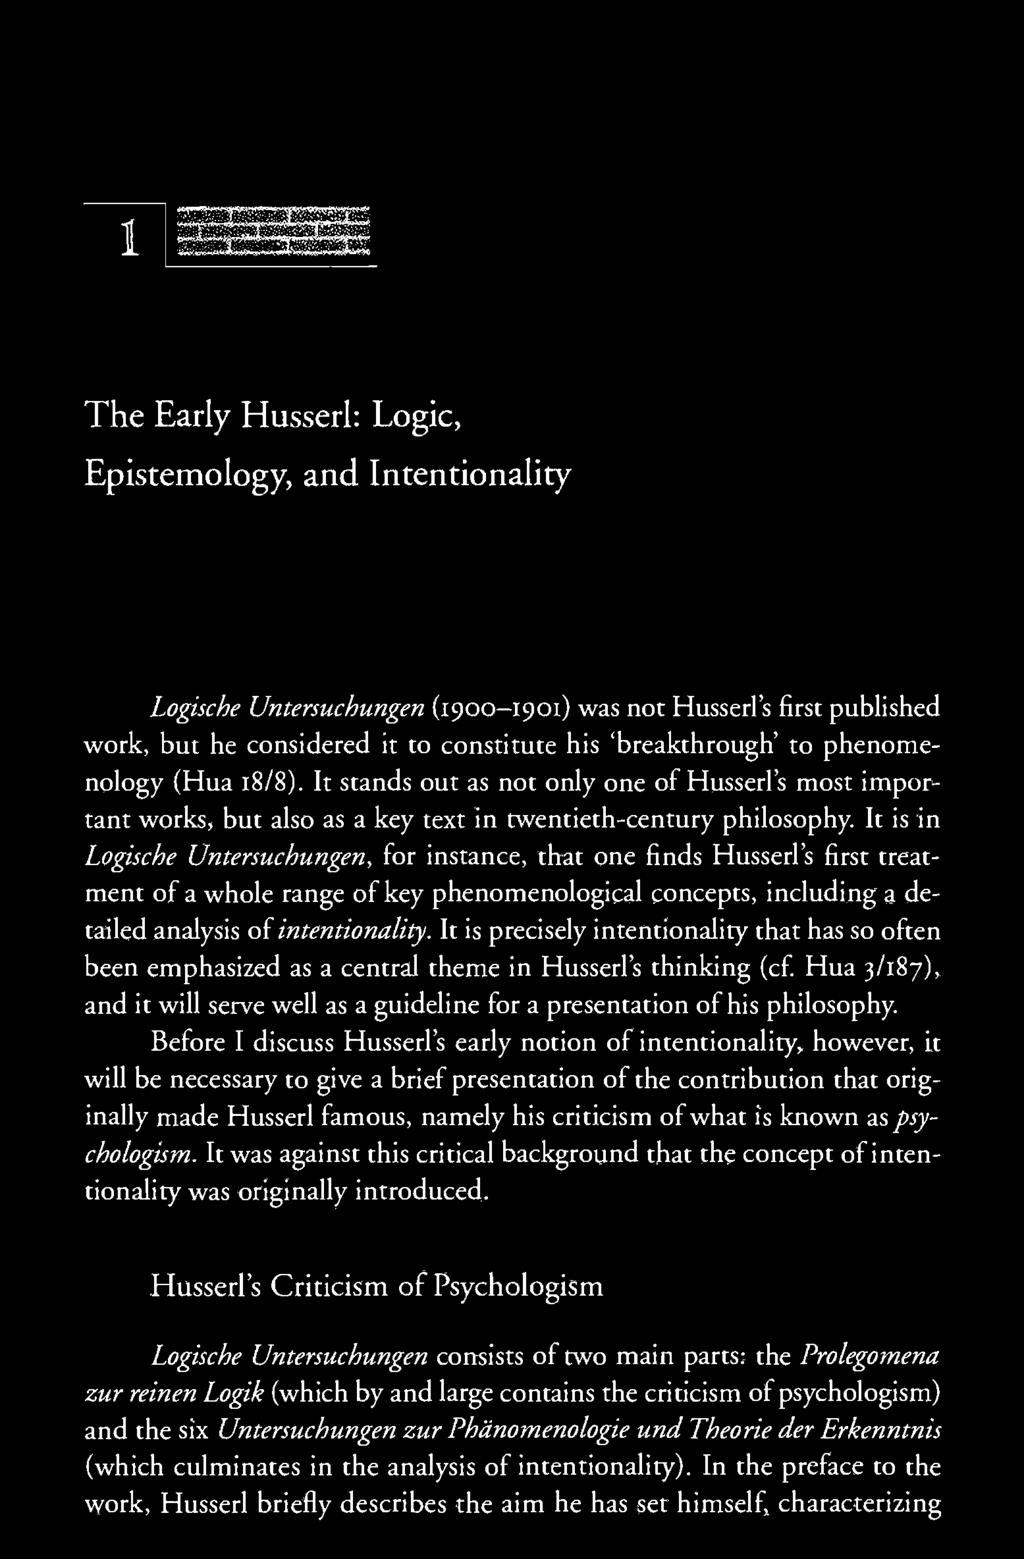 The Early Husserl: Logic, Epistemology, and Intentionality Logische Untersuchungen (1900-1901) was not Husserl's first published work, but he considered it to constitute his 'breakthrough' to